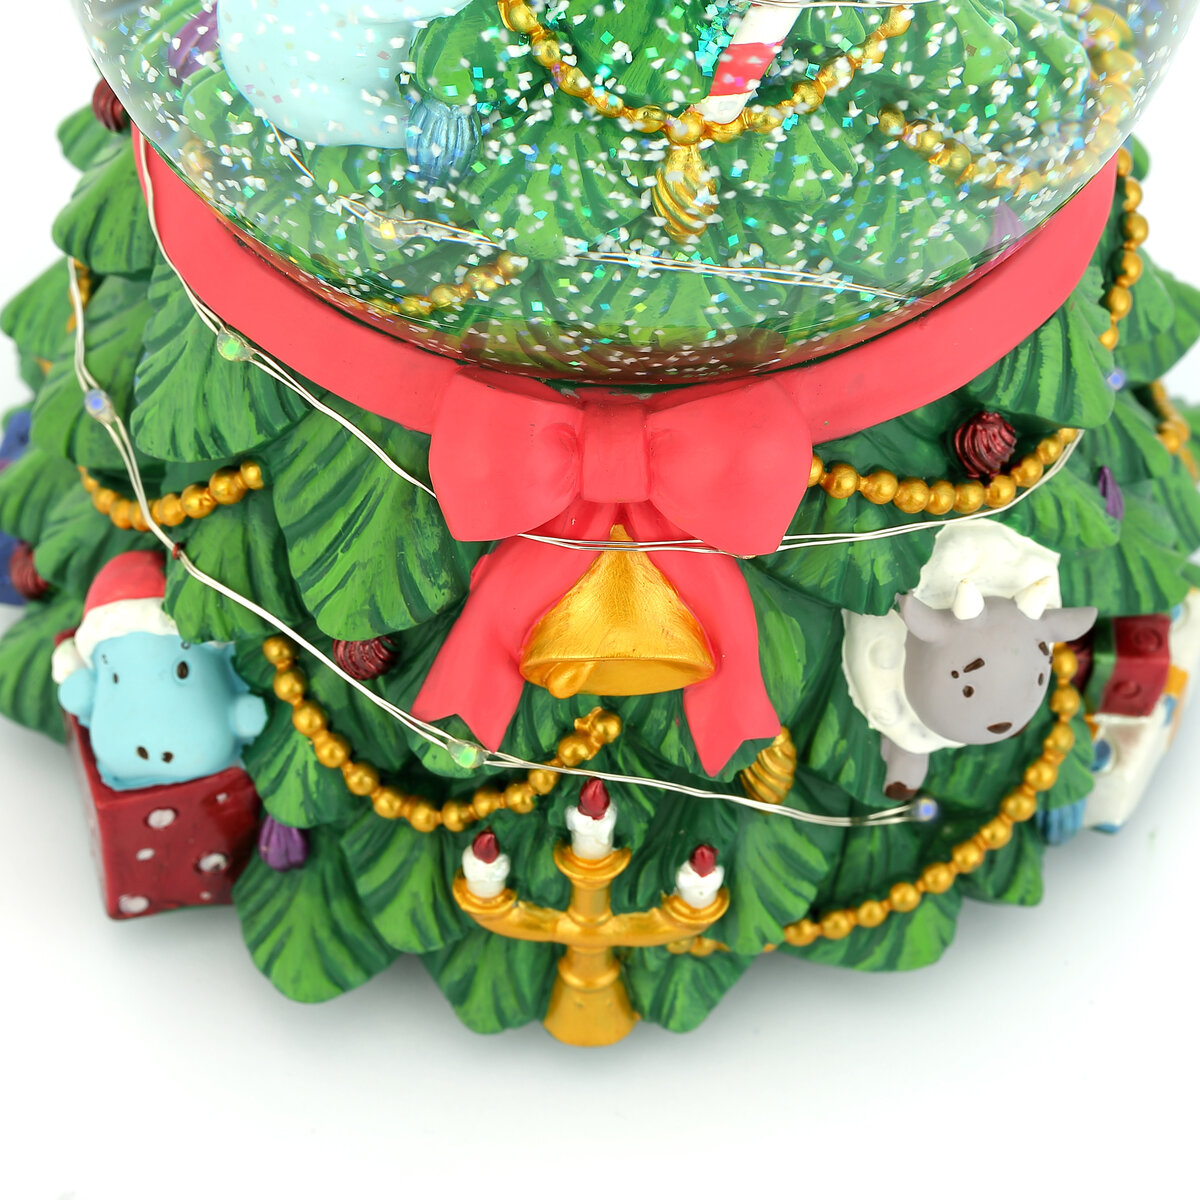 uniqicon LED Christmas Tree Music Box in Glass Dome with Santa Claus, Snowflakes  Decorations Tree Present